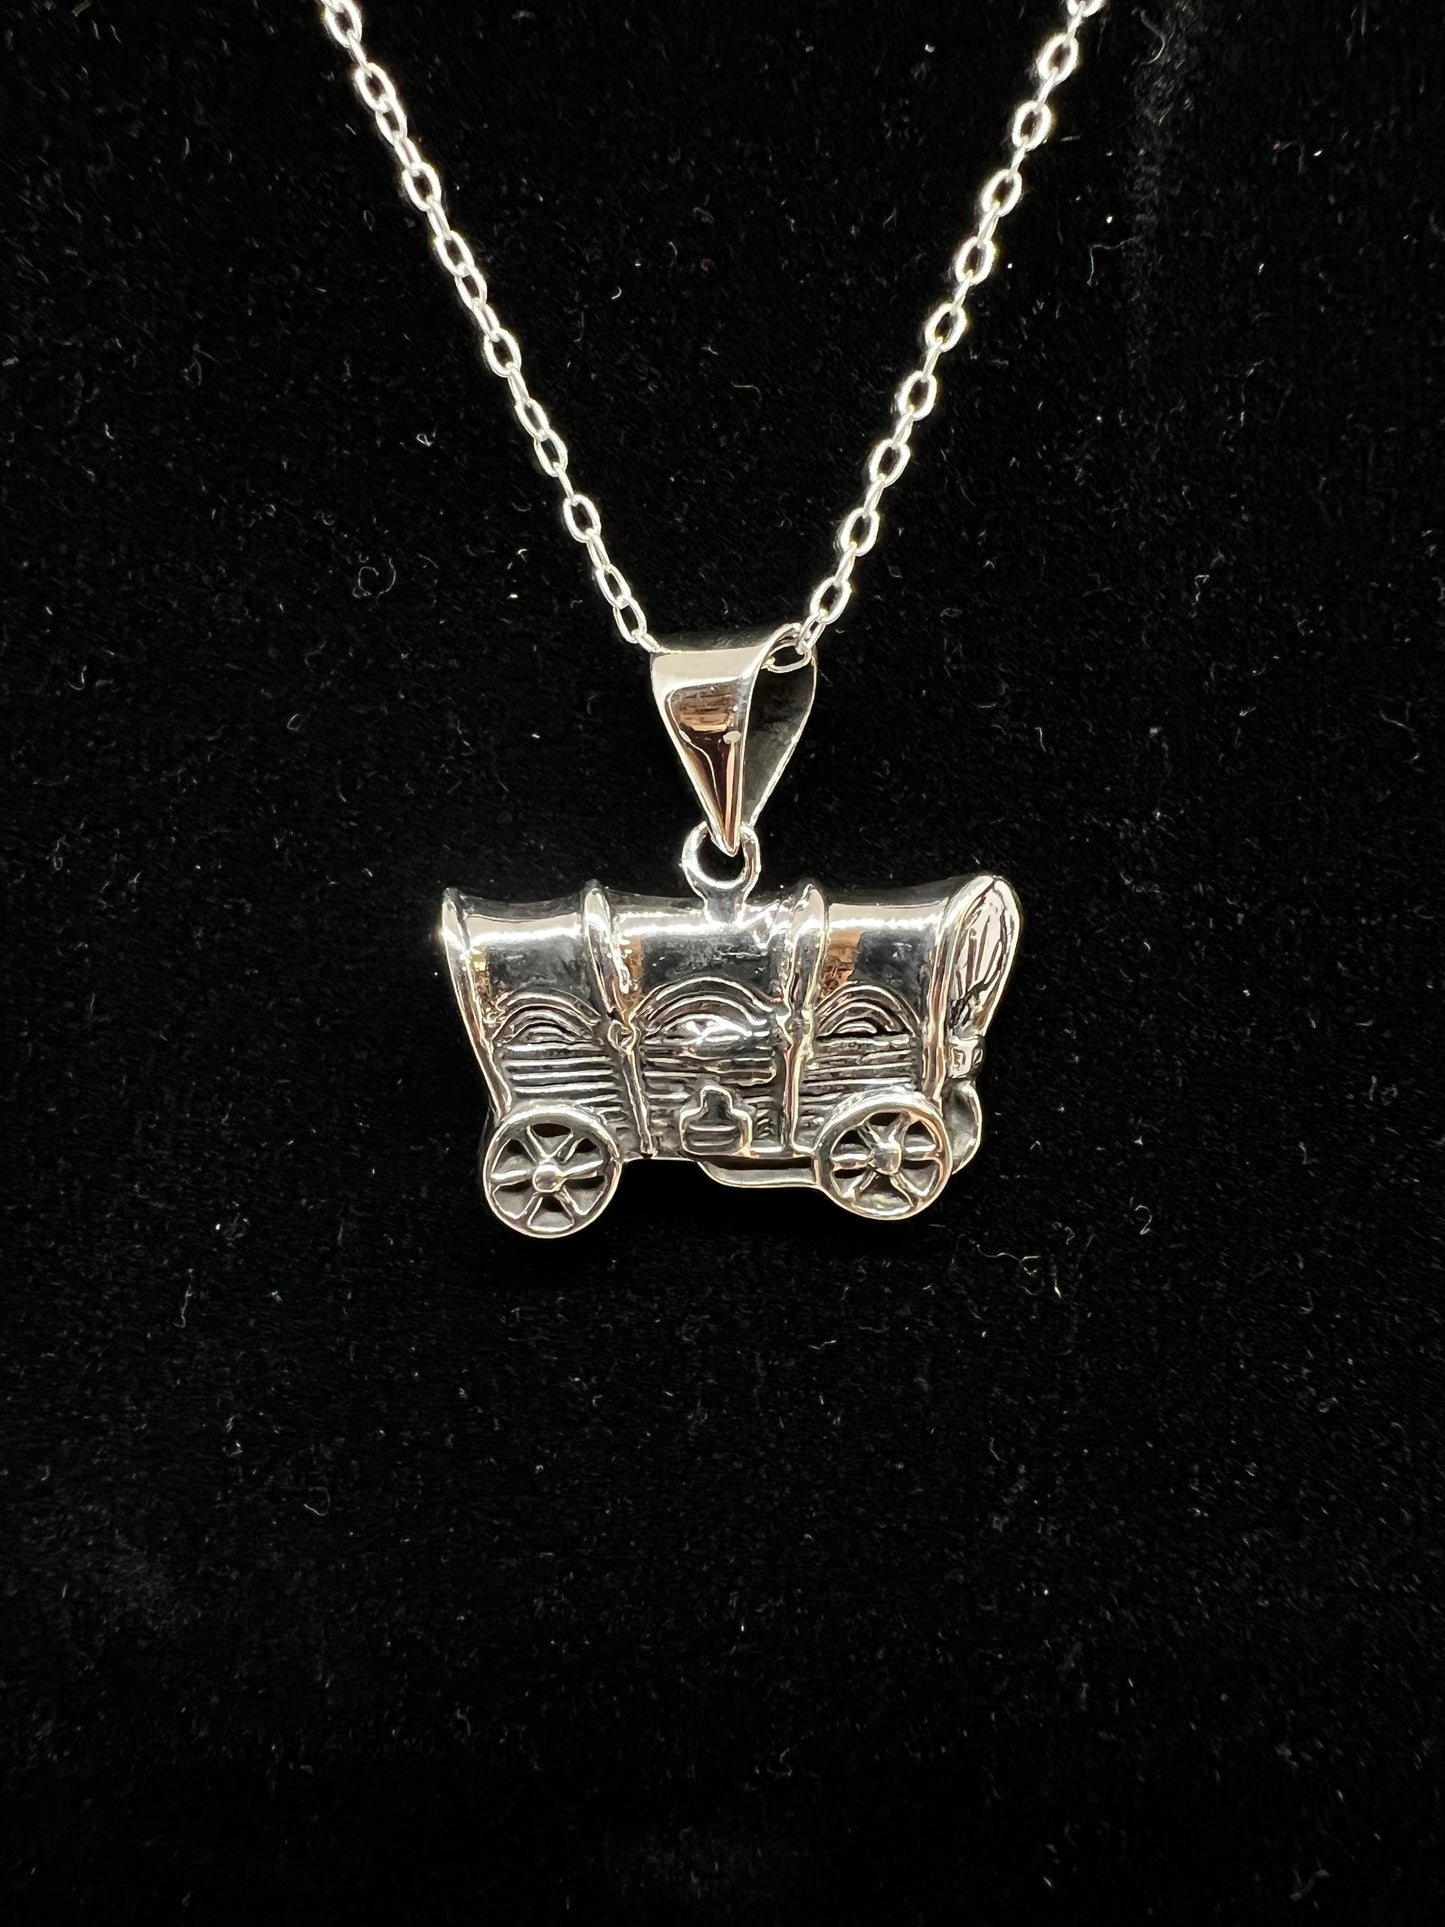 The Wagon Necklace